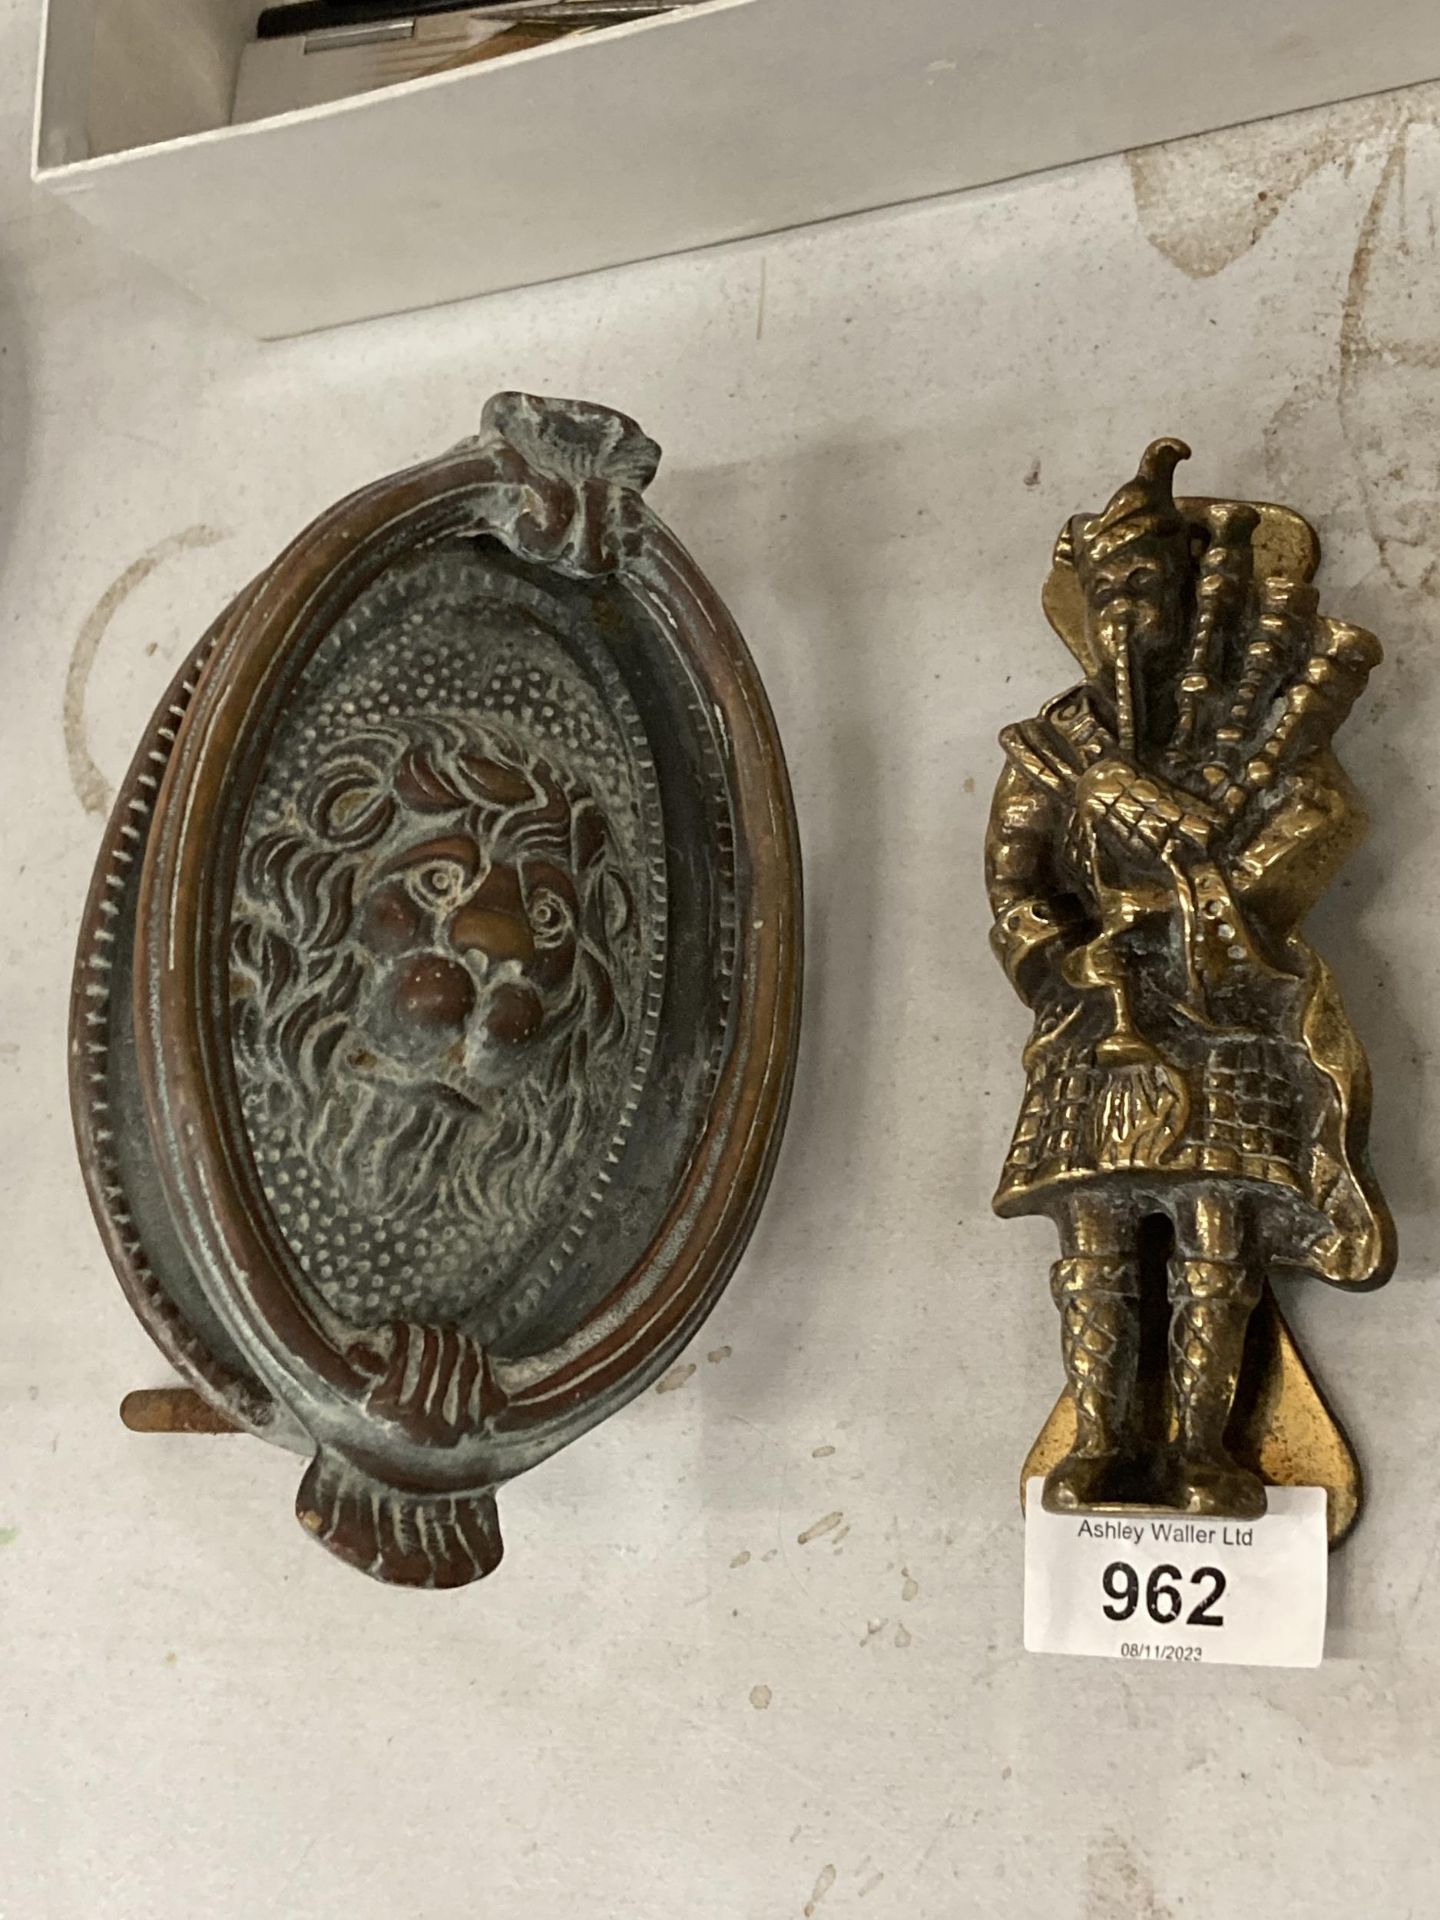 TWO VINTAGE BRASS DOOR KNOCKERS, ONE A LION, THE OTHER A SCOTSMAN